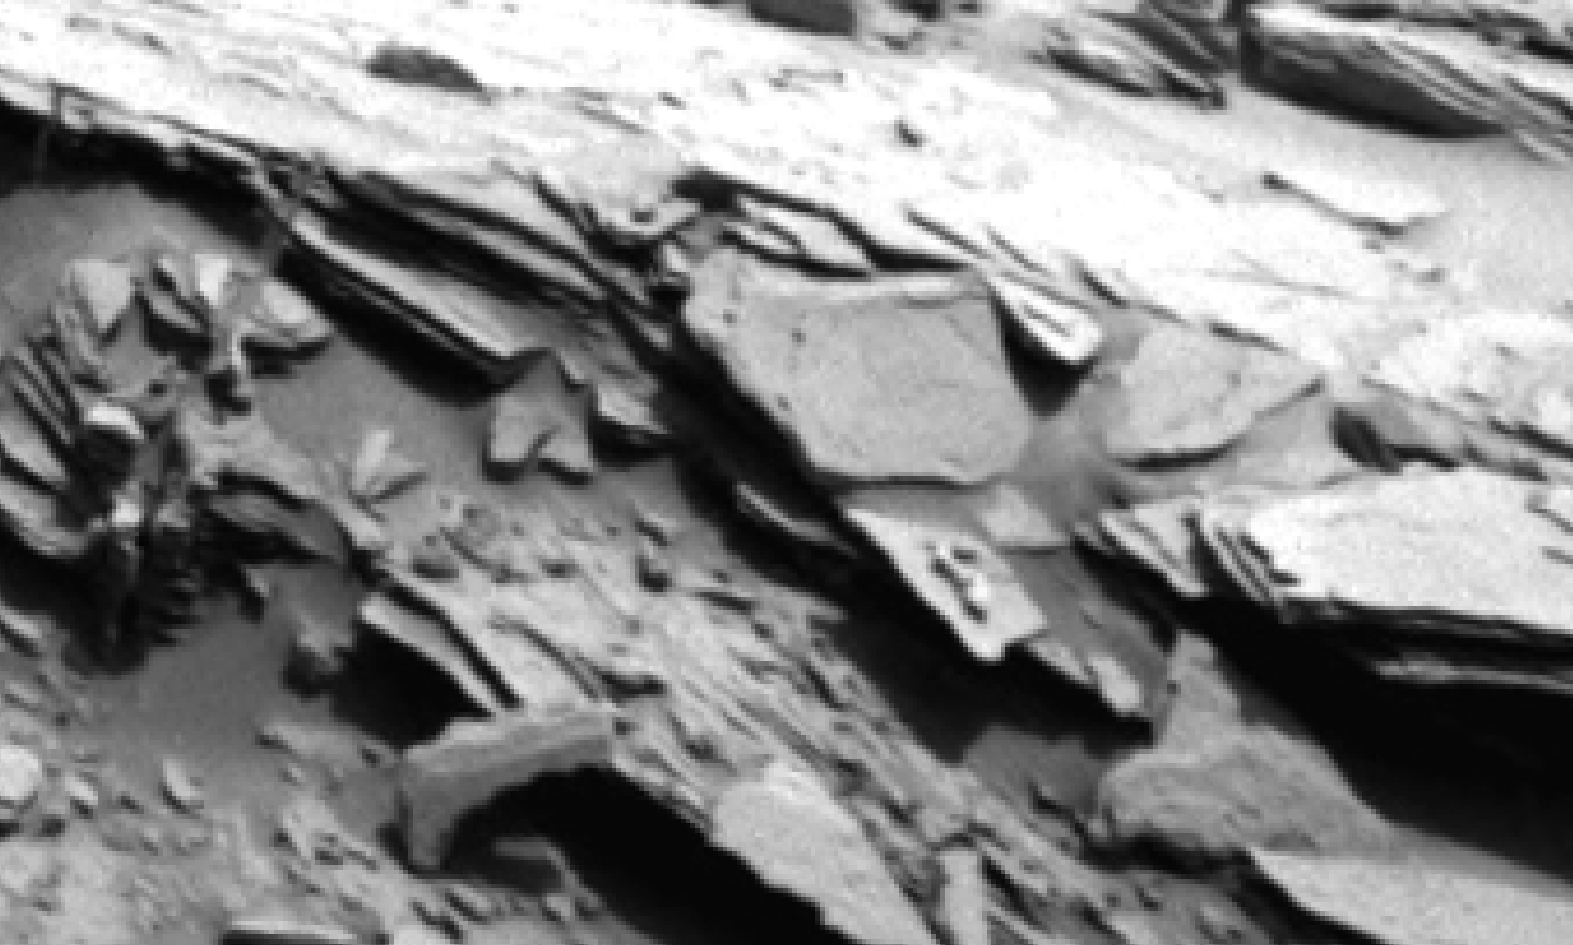 mars sol 1342 anomaly-artifacts 4 was life on mars